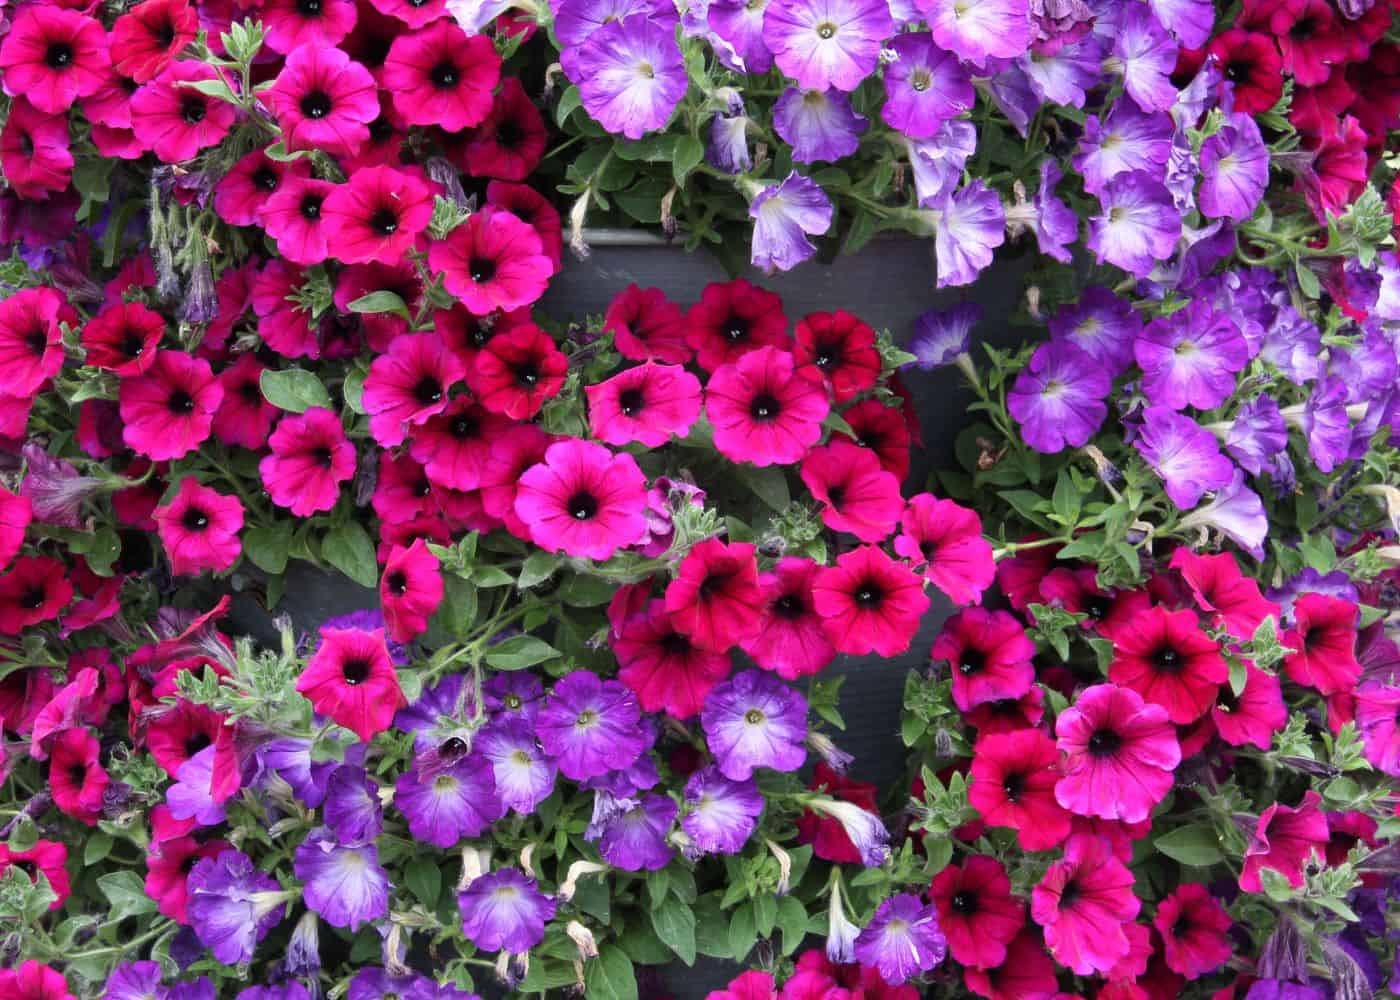 Petunia flowers - annuals - pink and purple